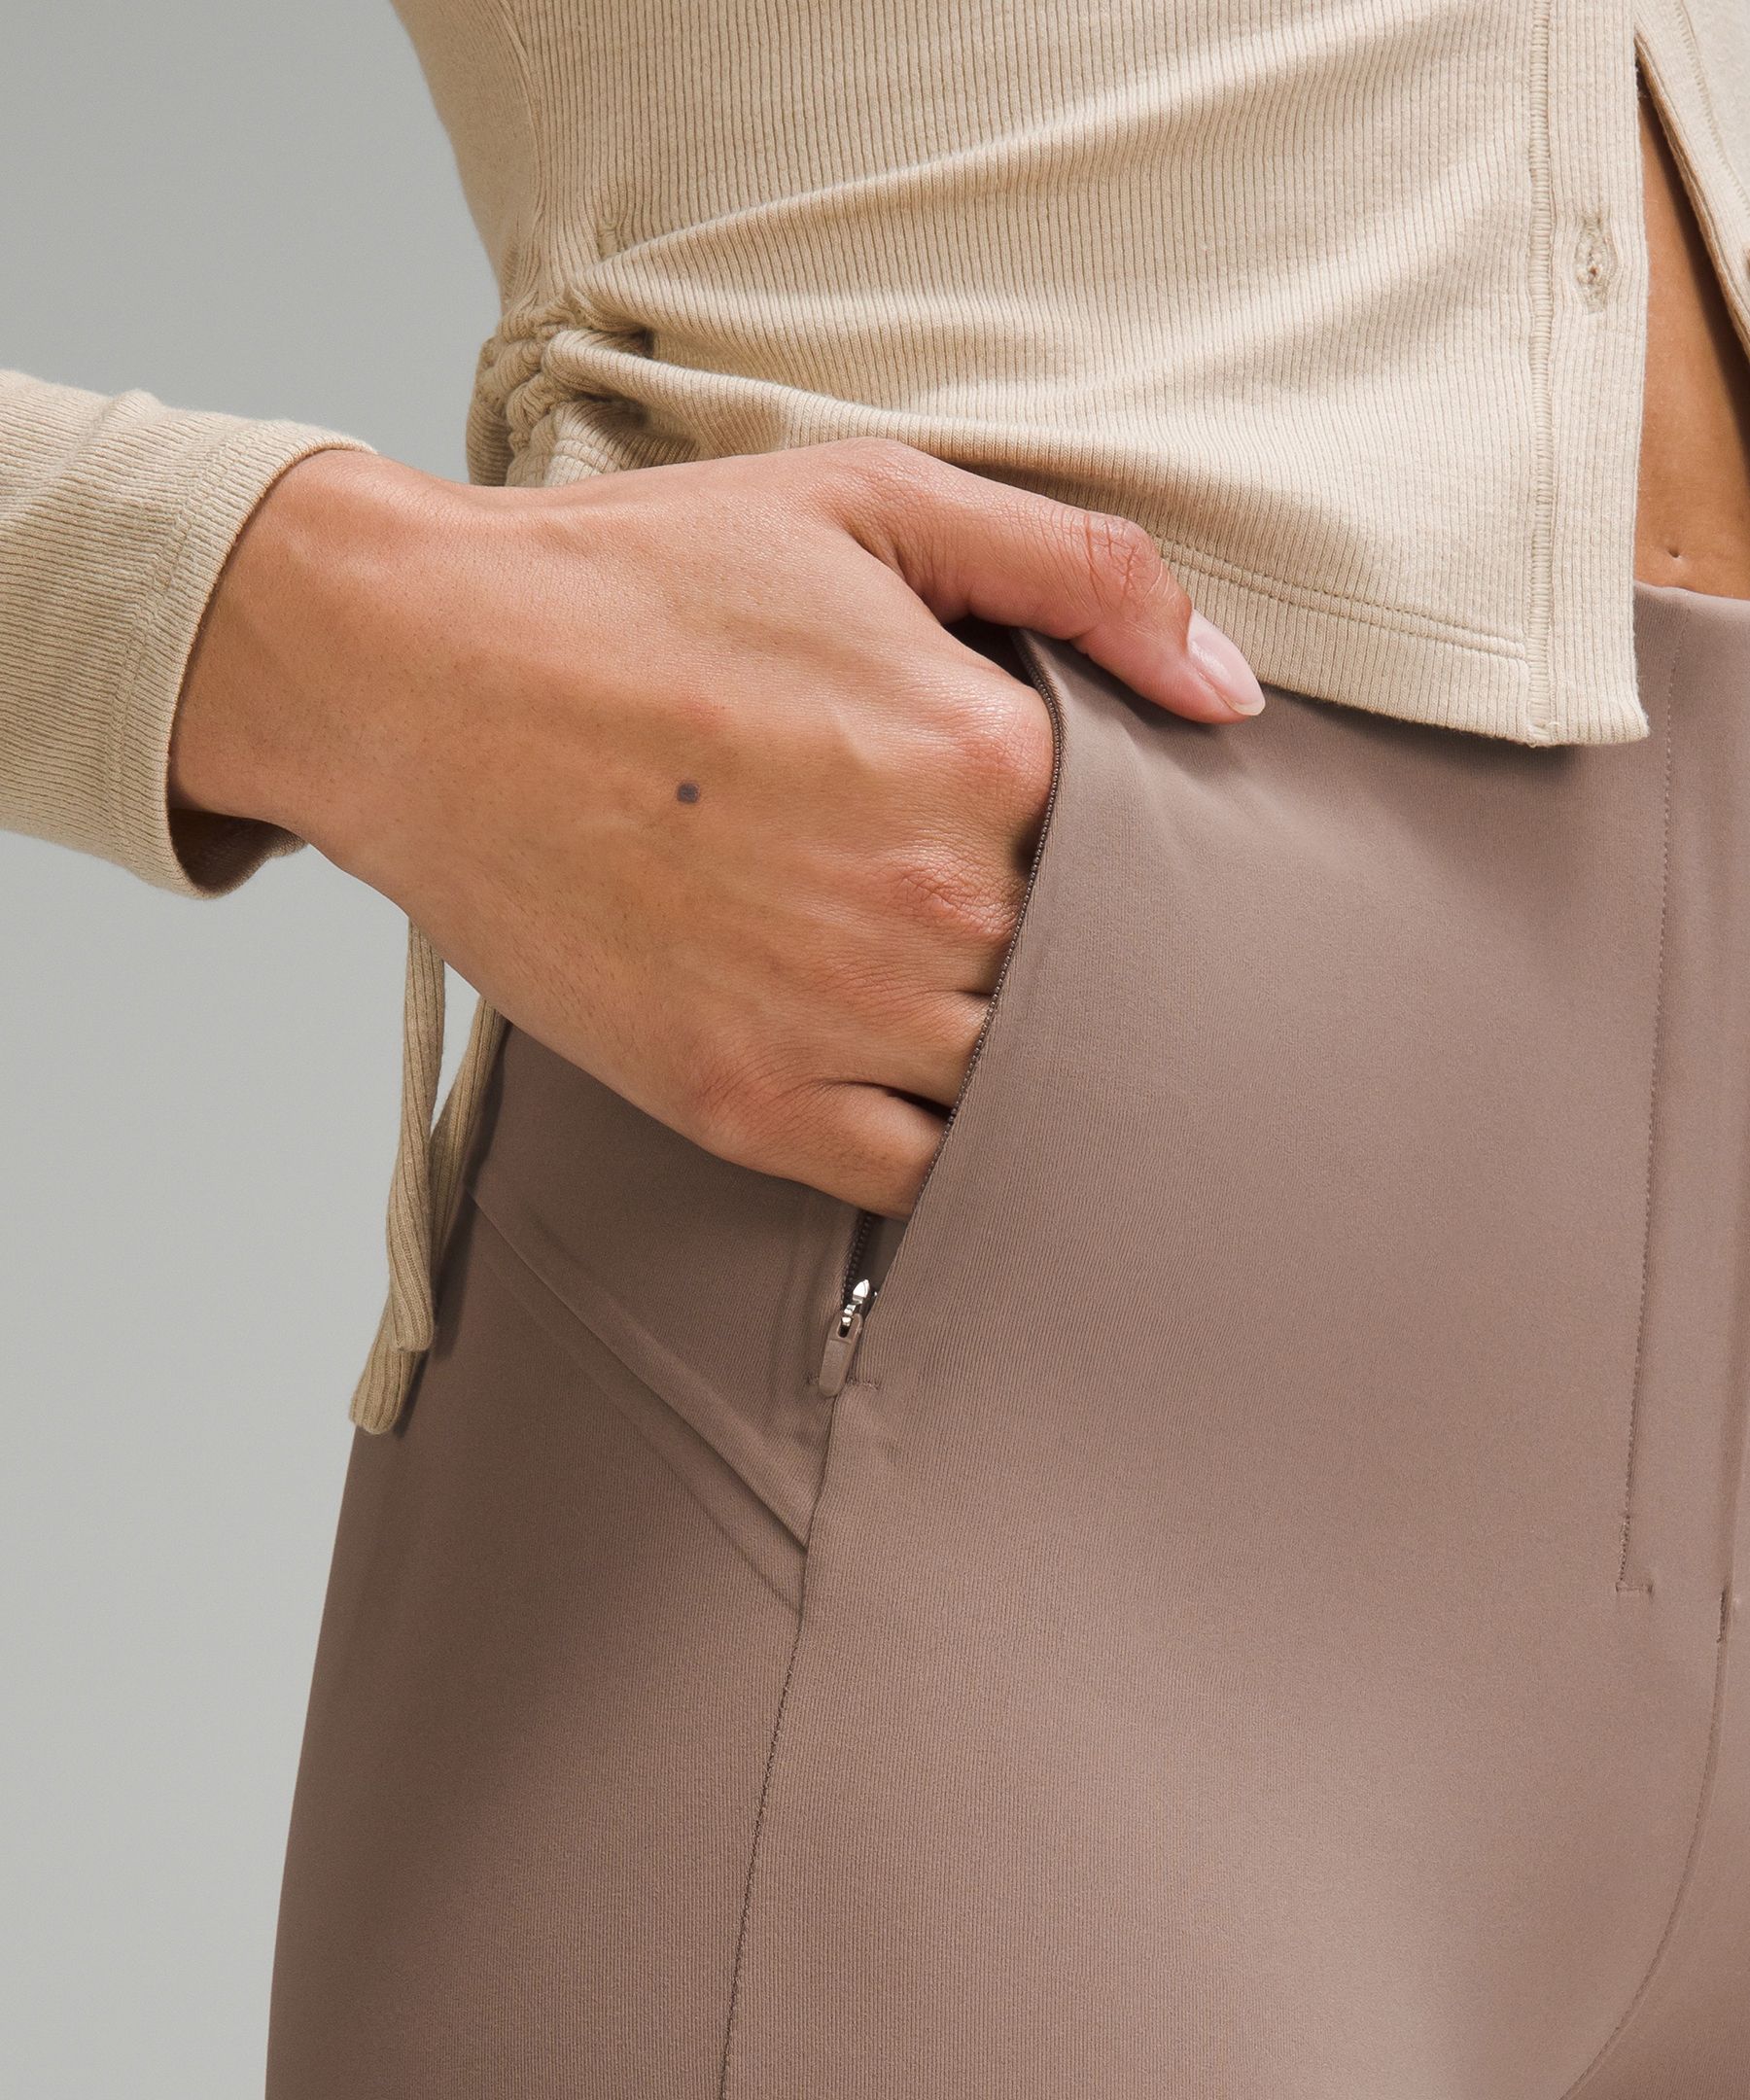 The @lululemon smooth fit pull on high rise pants are high on my